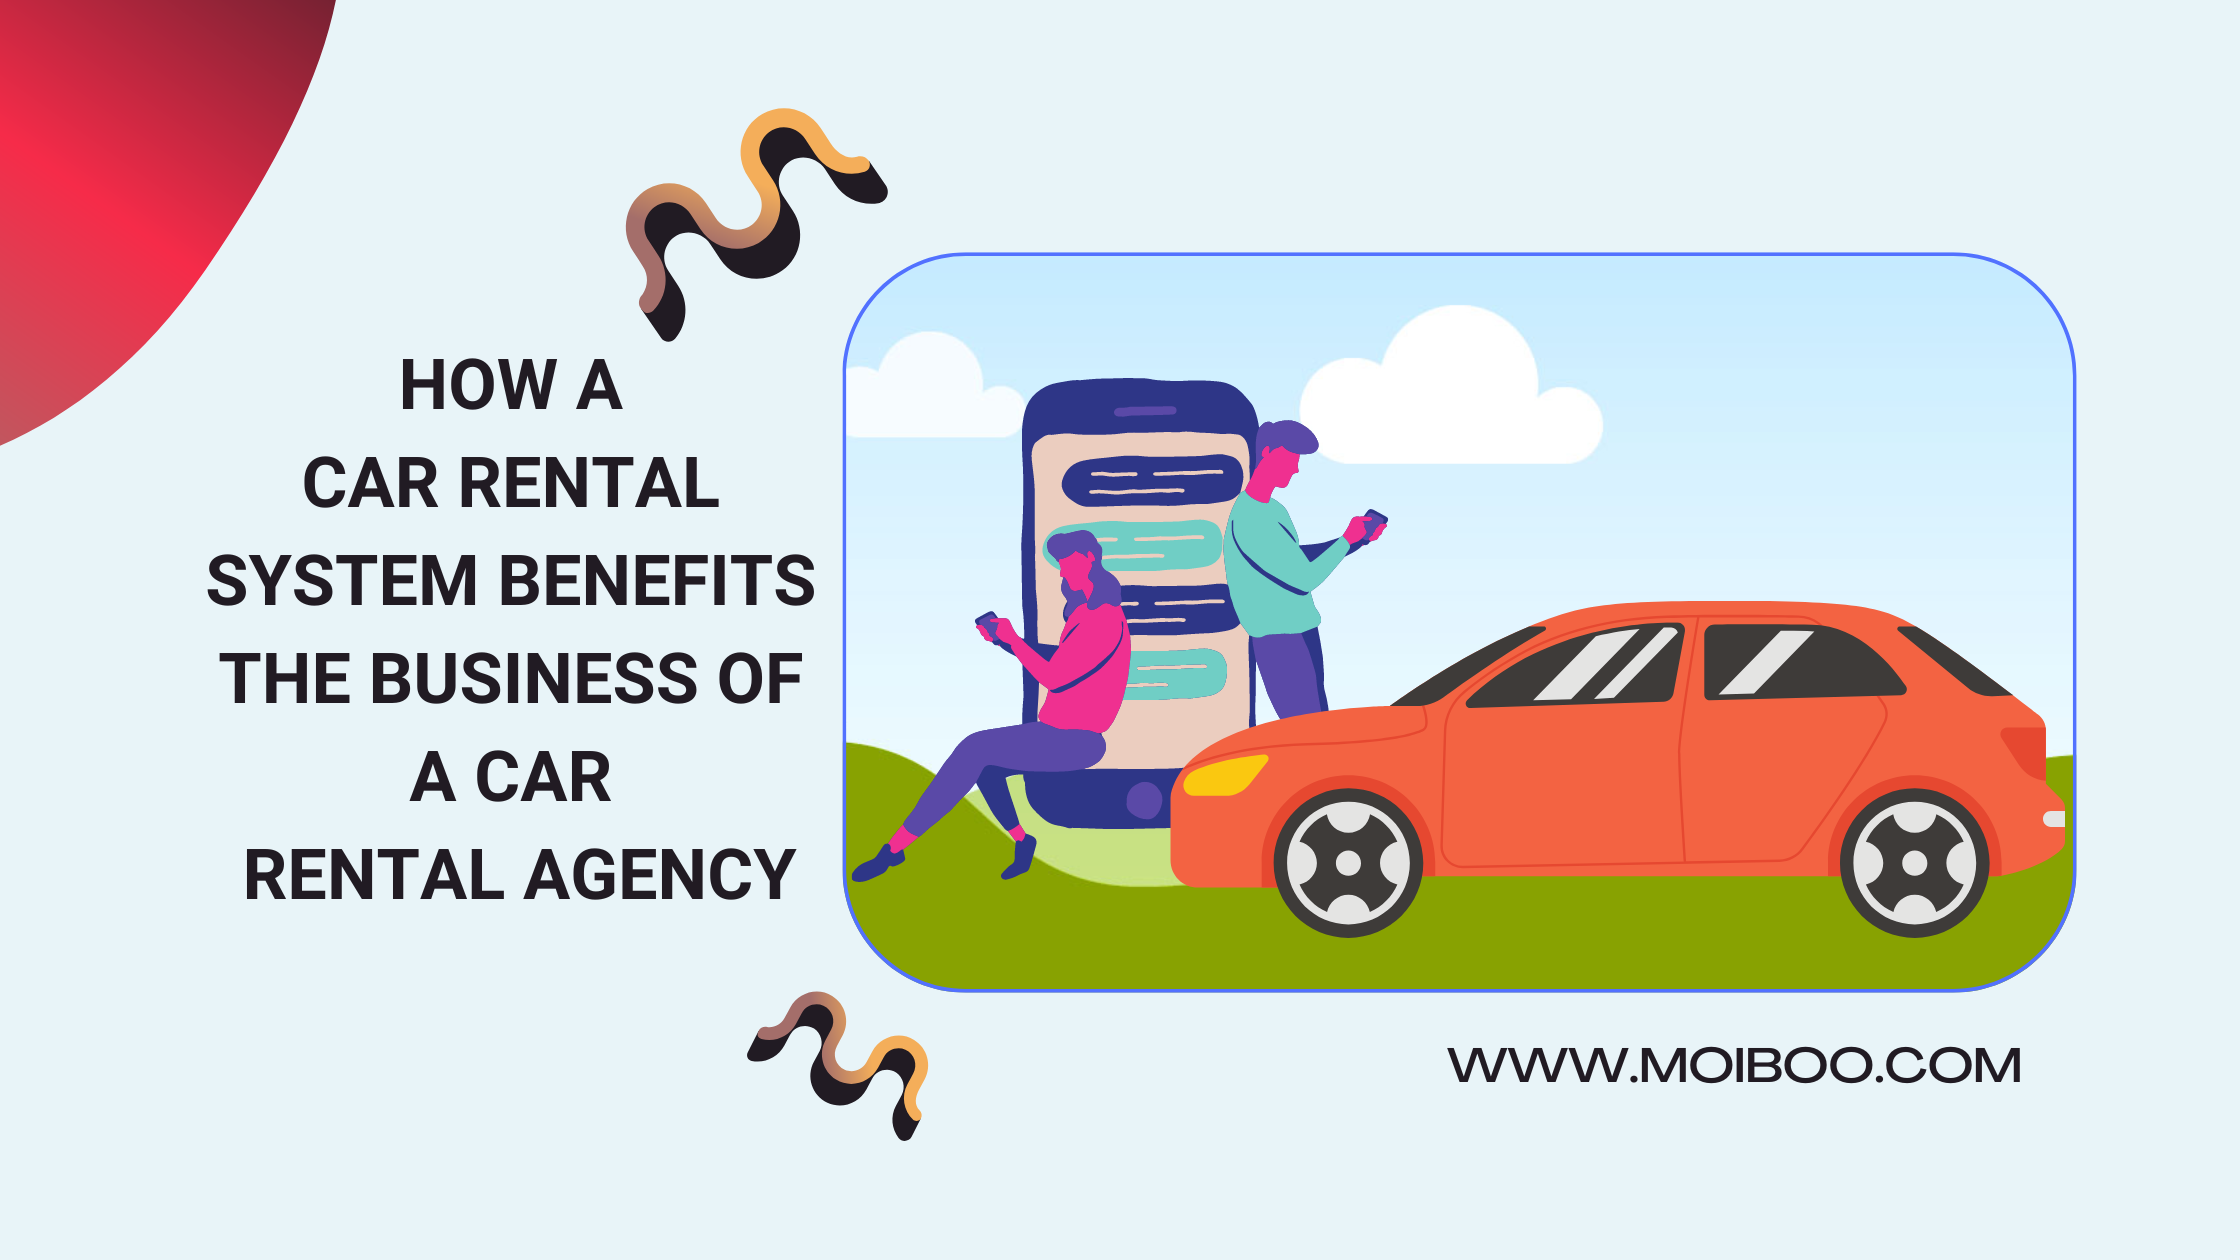 How a car rental system benefits the business of a car rental agency